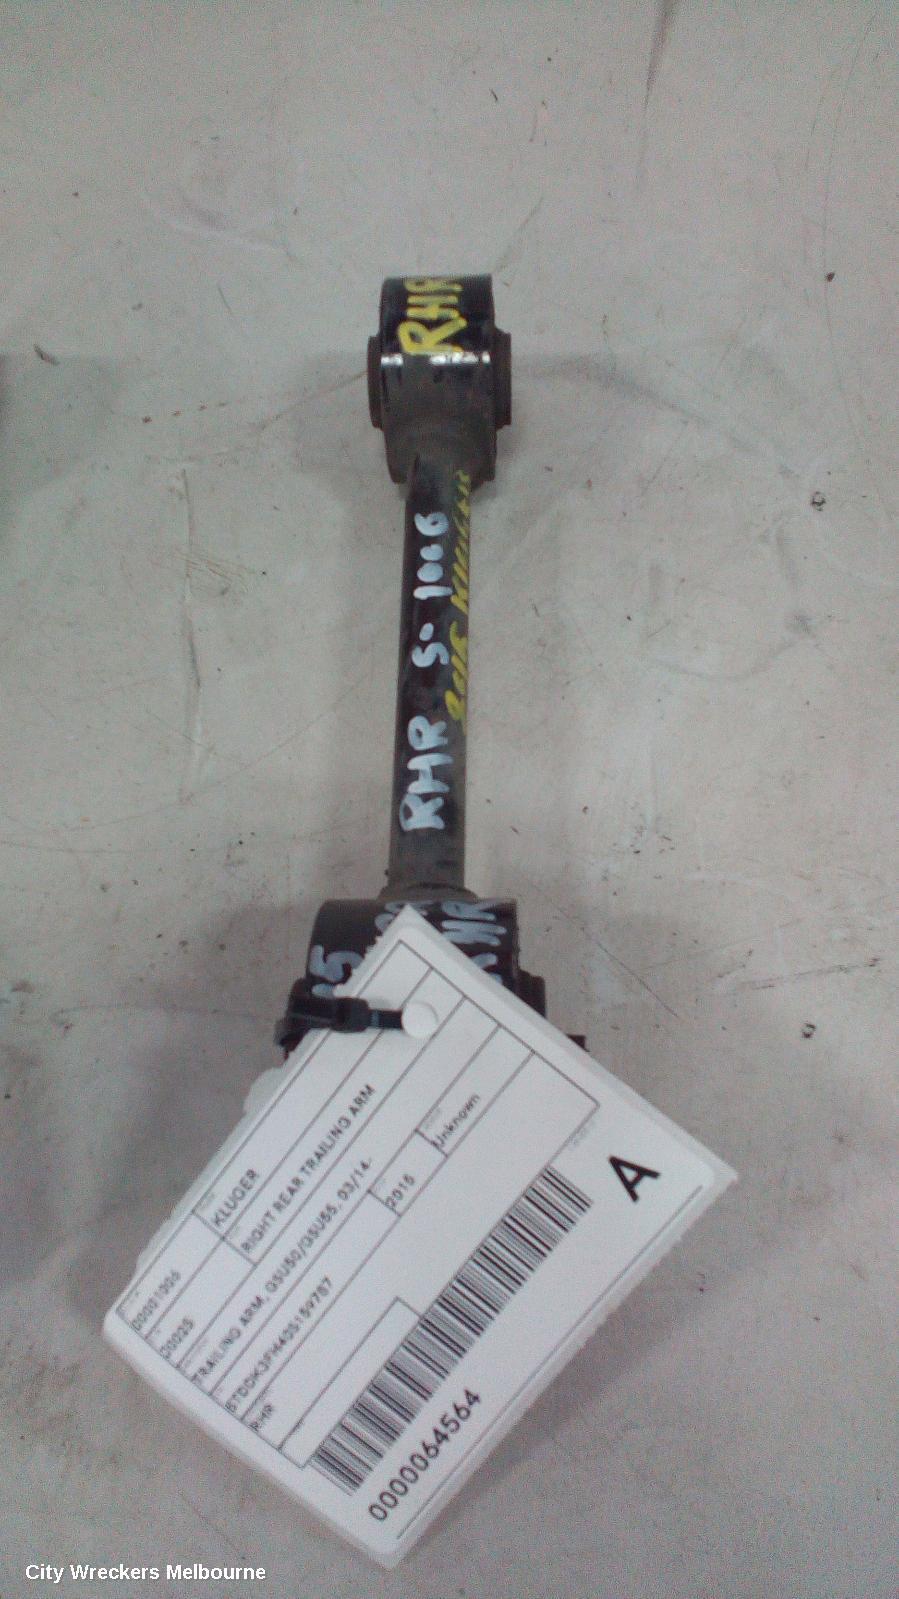 TOYOTA KLUGER 2015 Right Rear Trailing Arm